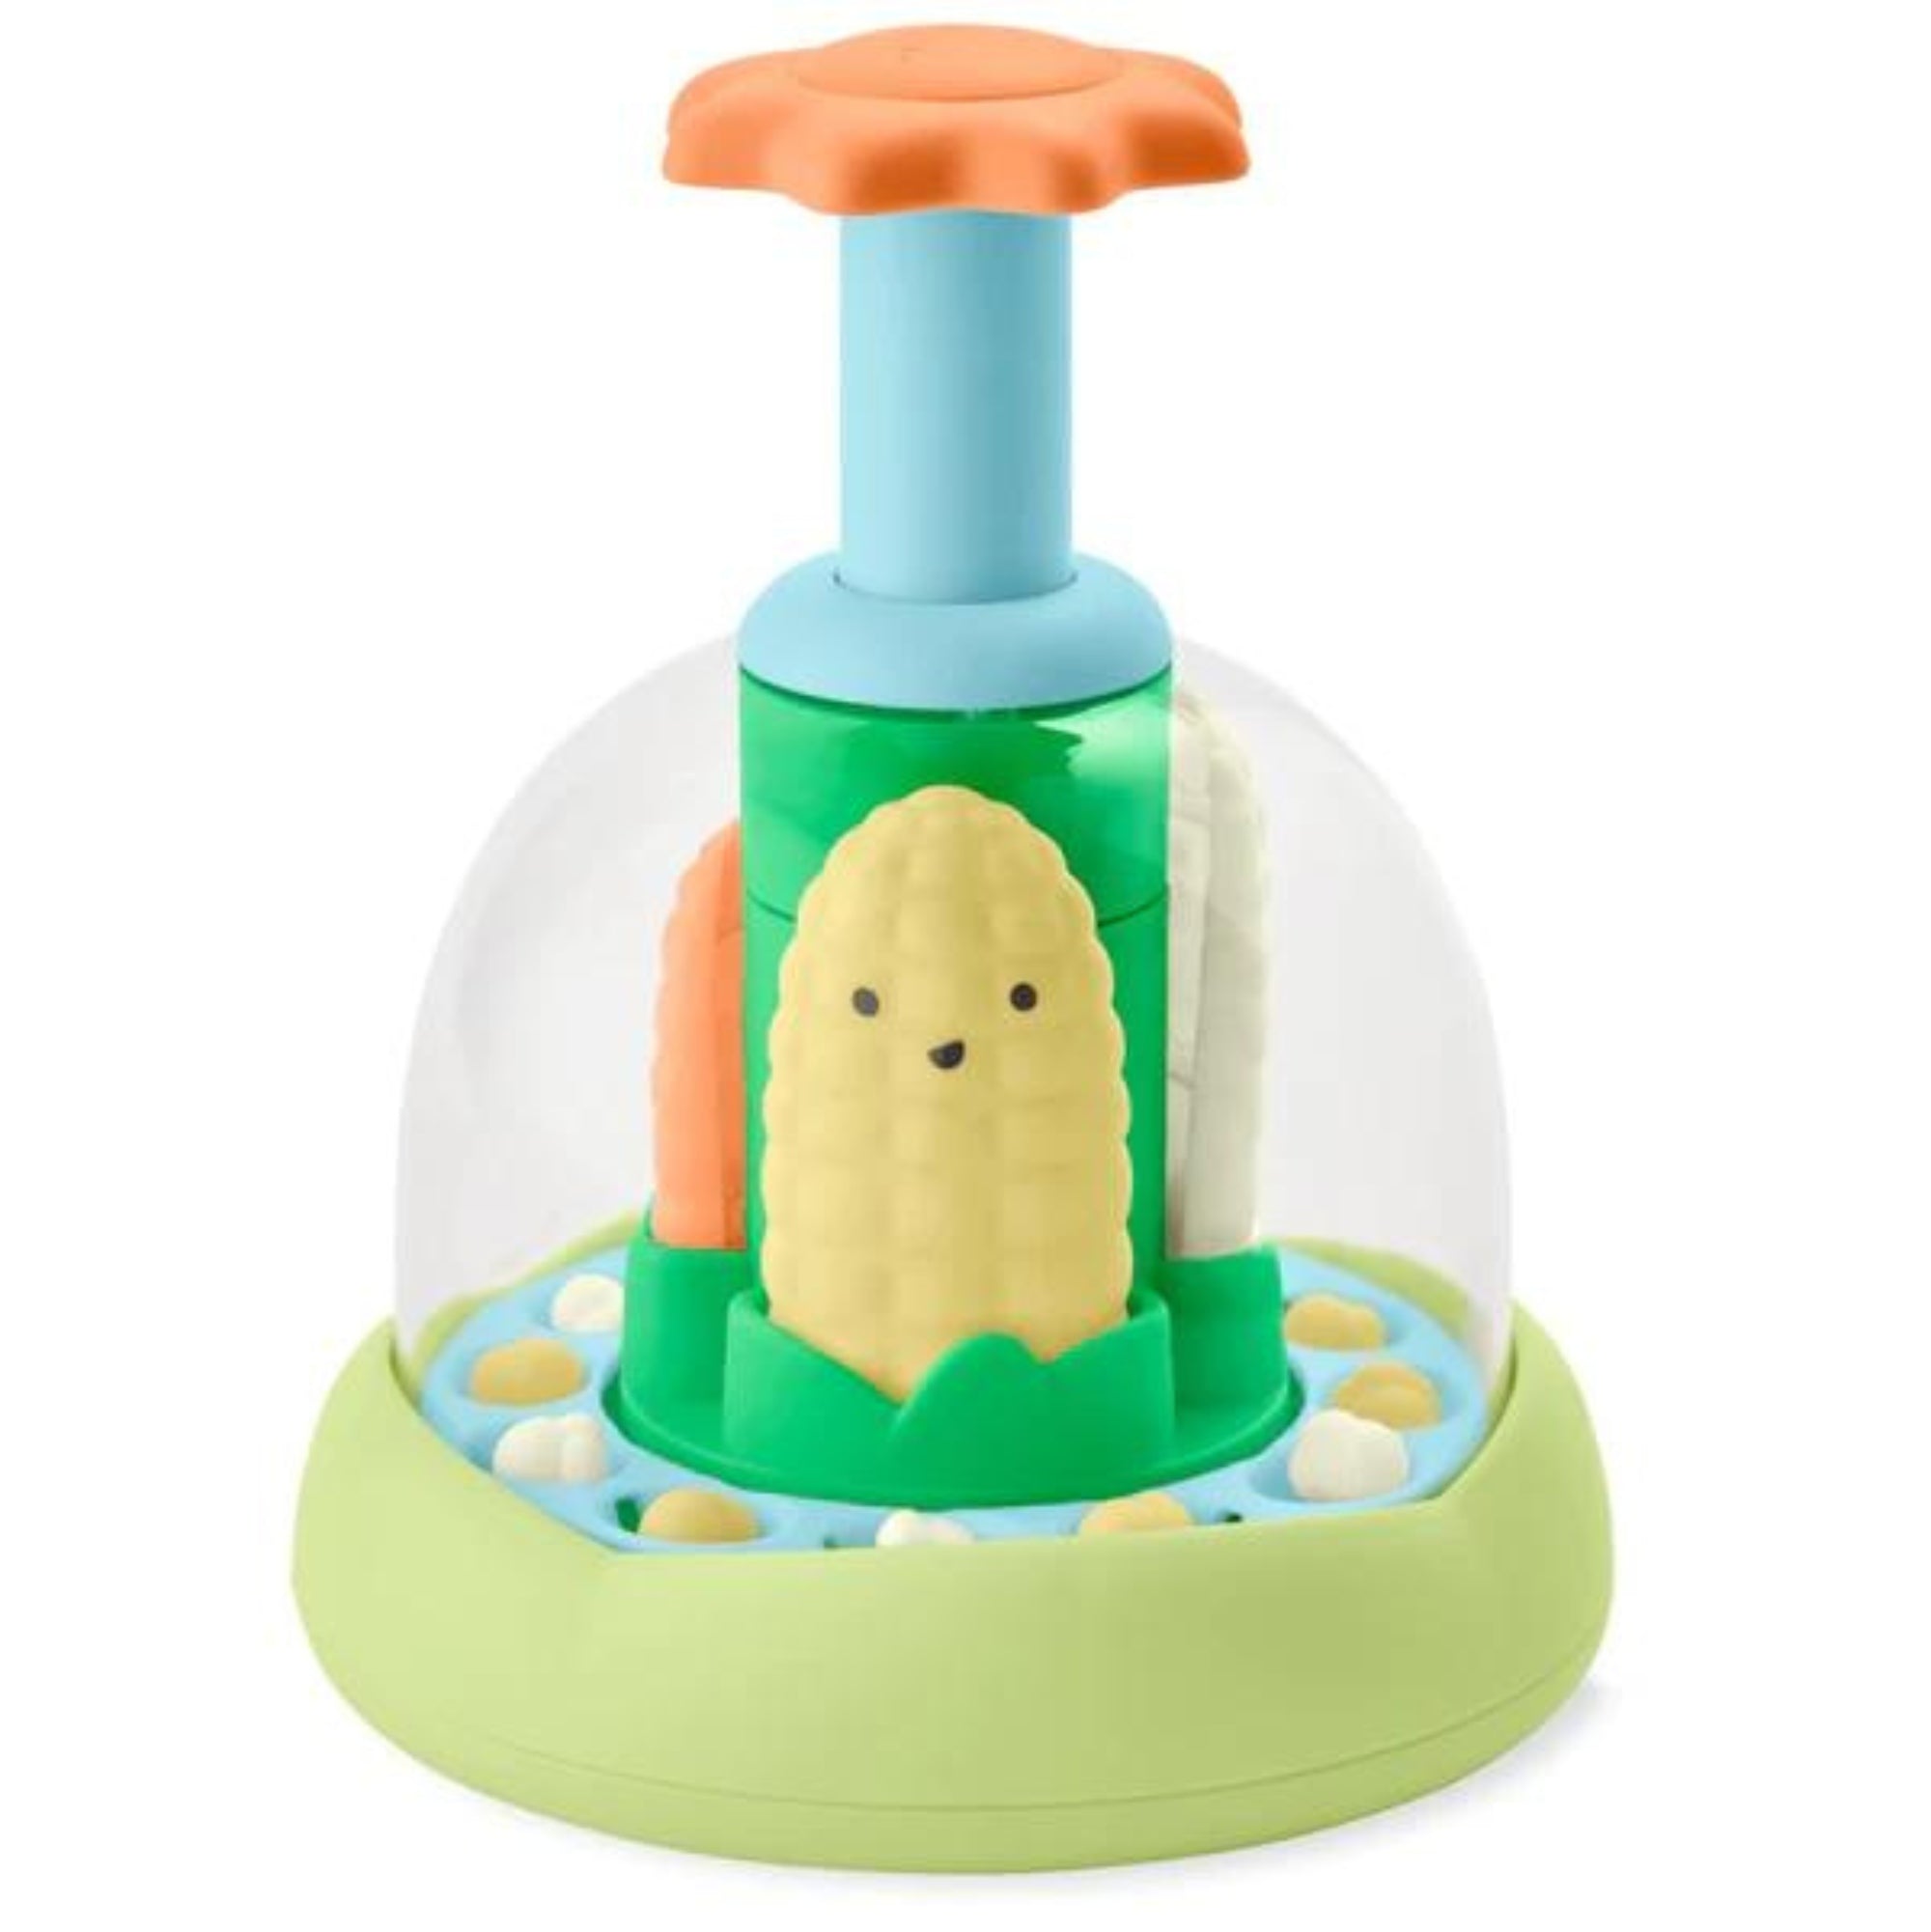 Skip Hop Zoo Farmstand Push & Spin Baby Toy - Tiny Tots Baby Store 